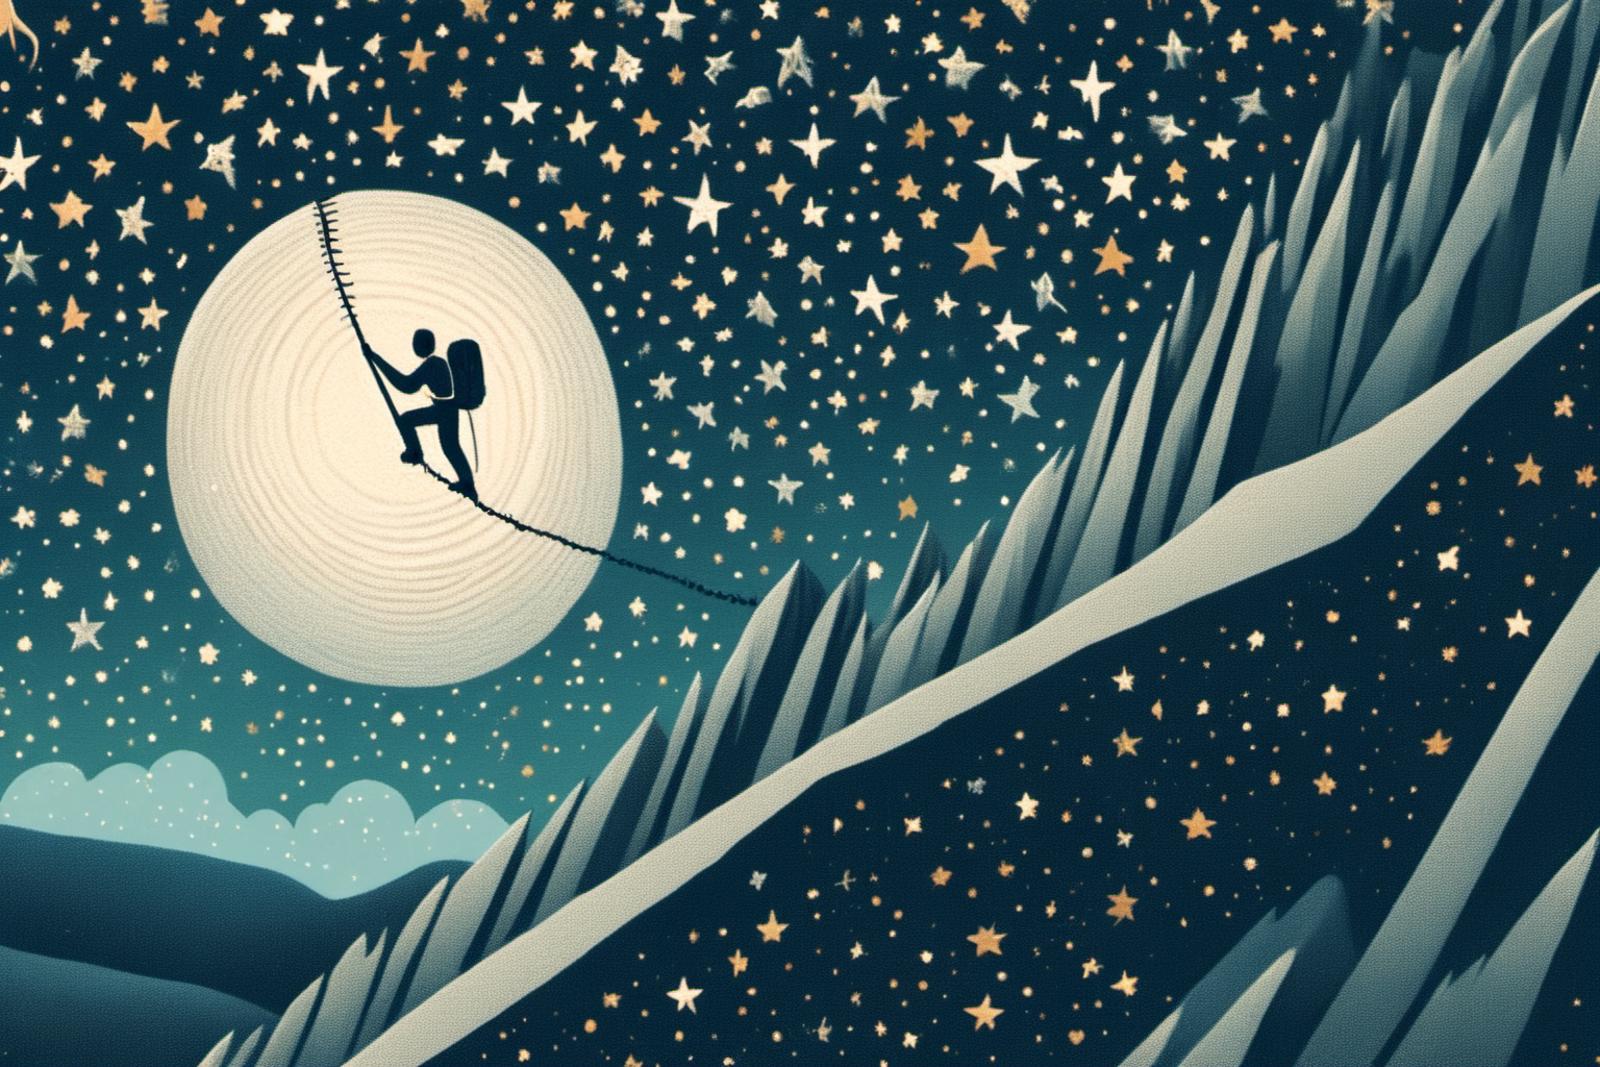 Man Climbing a Mountain on a Rope Ladder at Night with a Full Moon in the Background